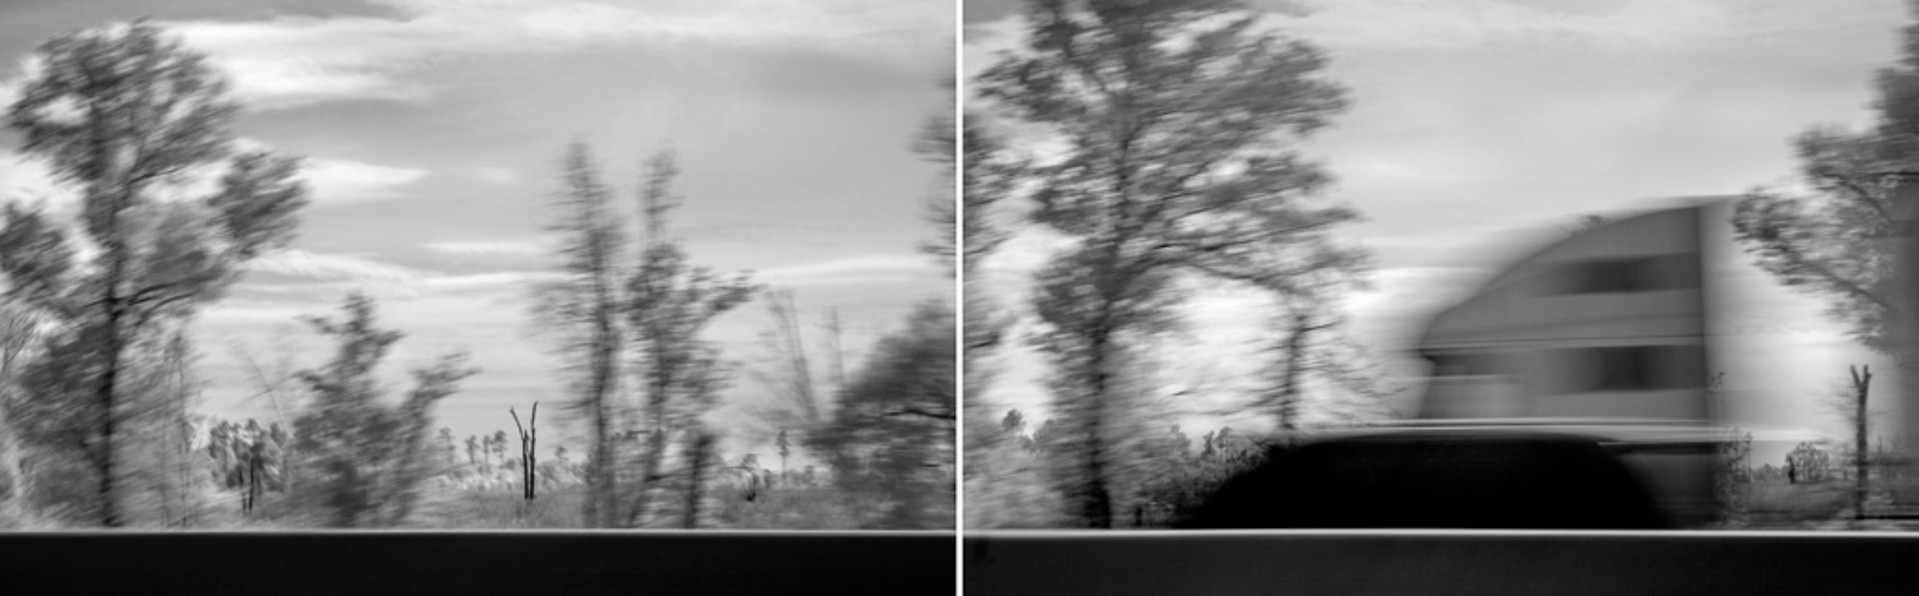 Causeway (diptych) by Beth Lilly